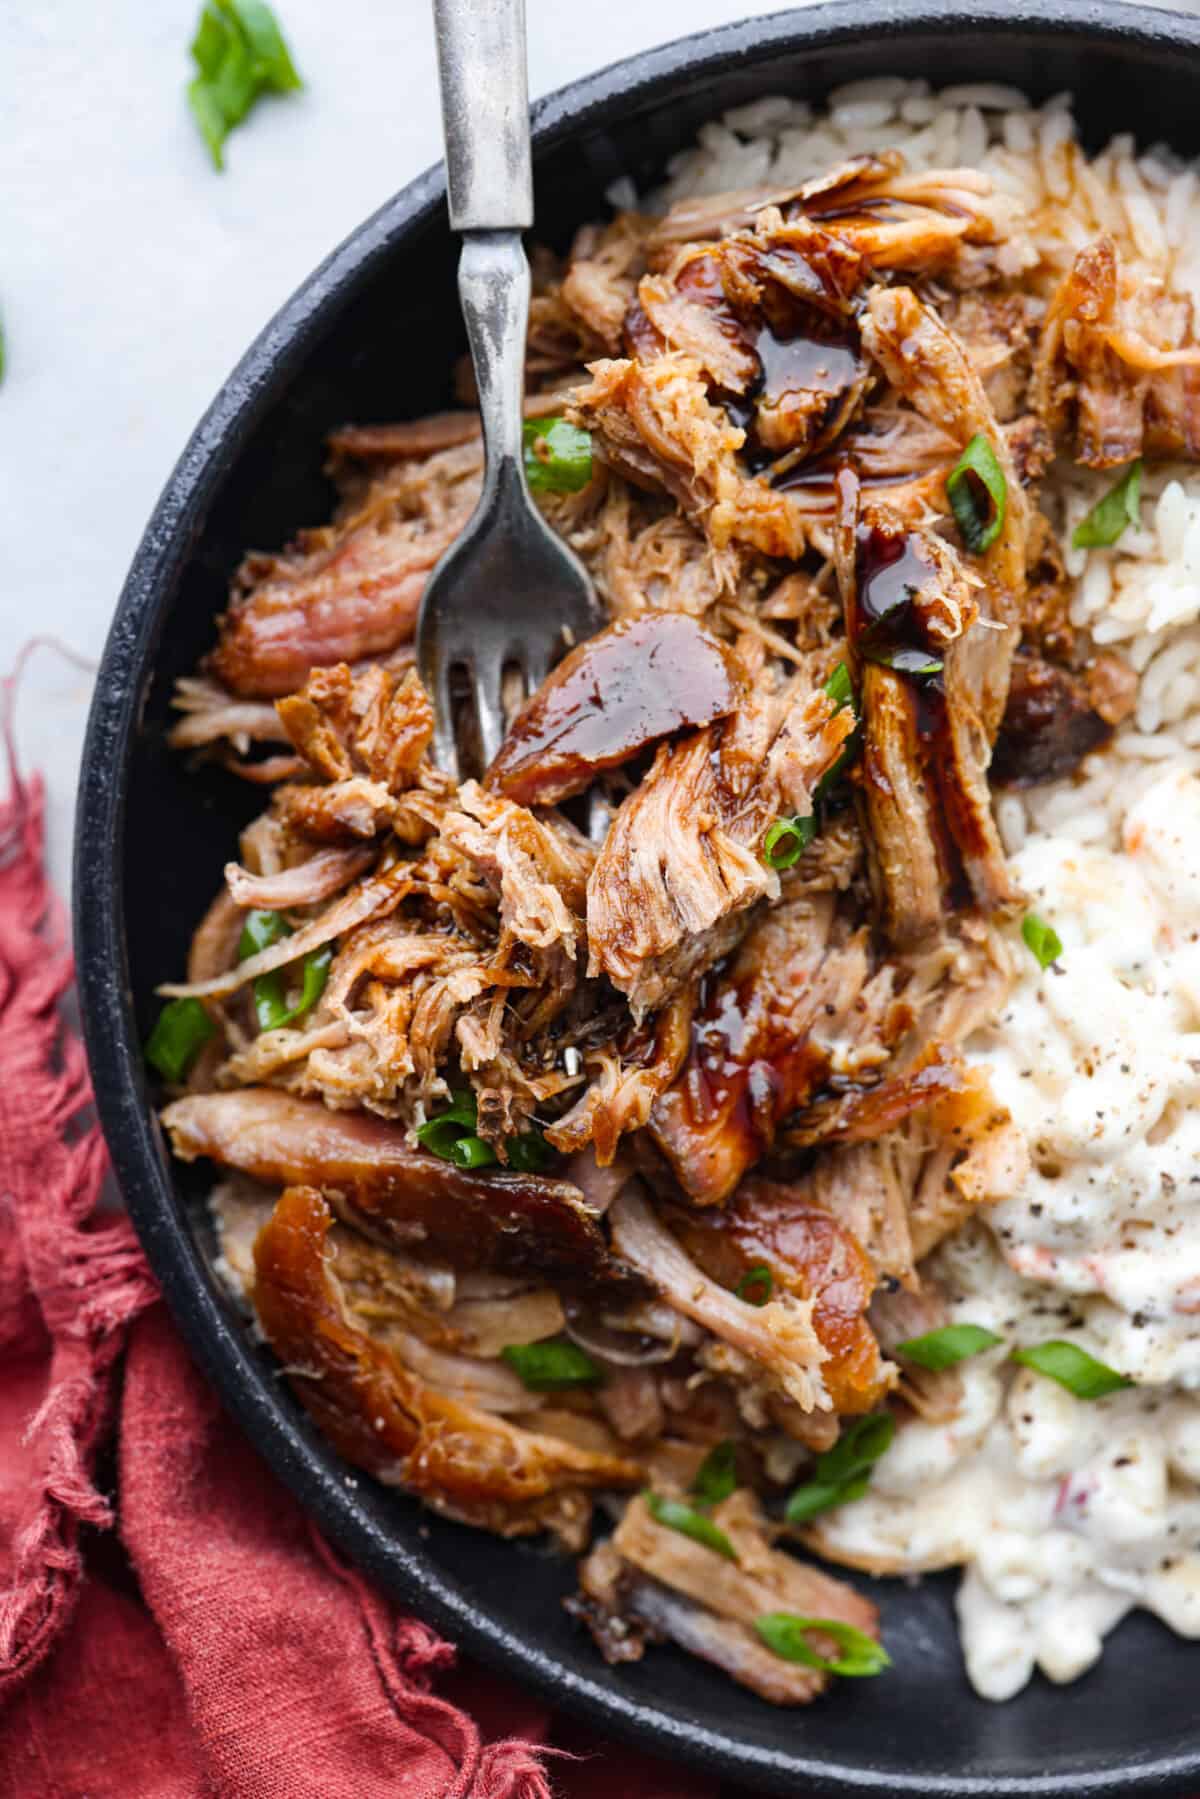 Top view of kalua pulled pork in a black bowl with rice and macaroni salad on the side. A fork is inside the bowl with teriyaki sauce and green onions garnished on top.